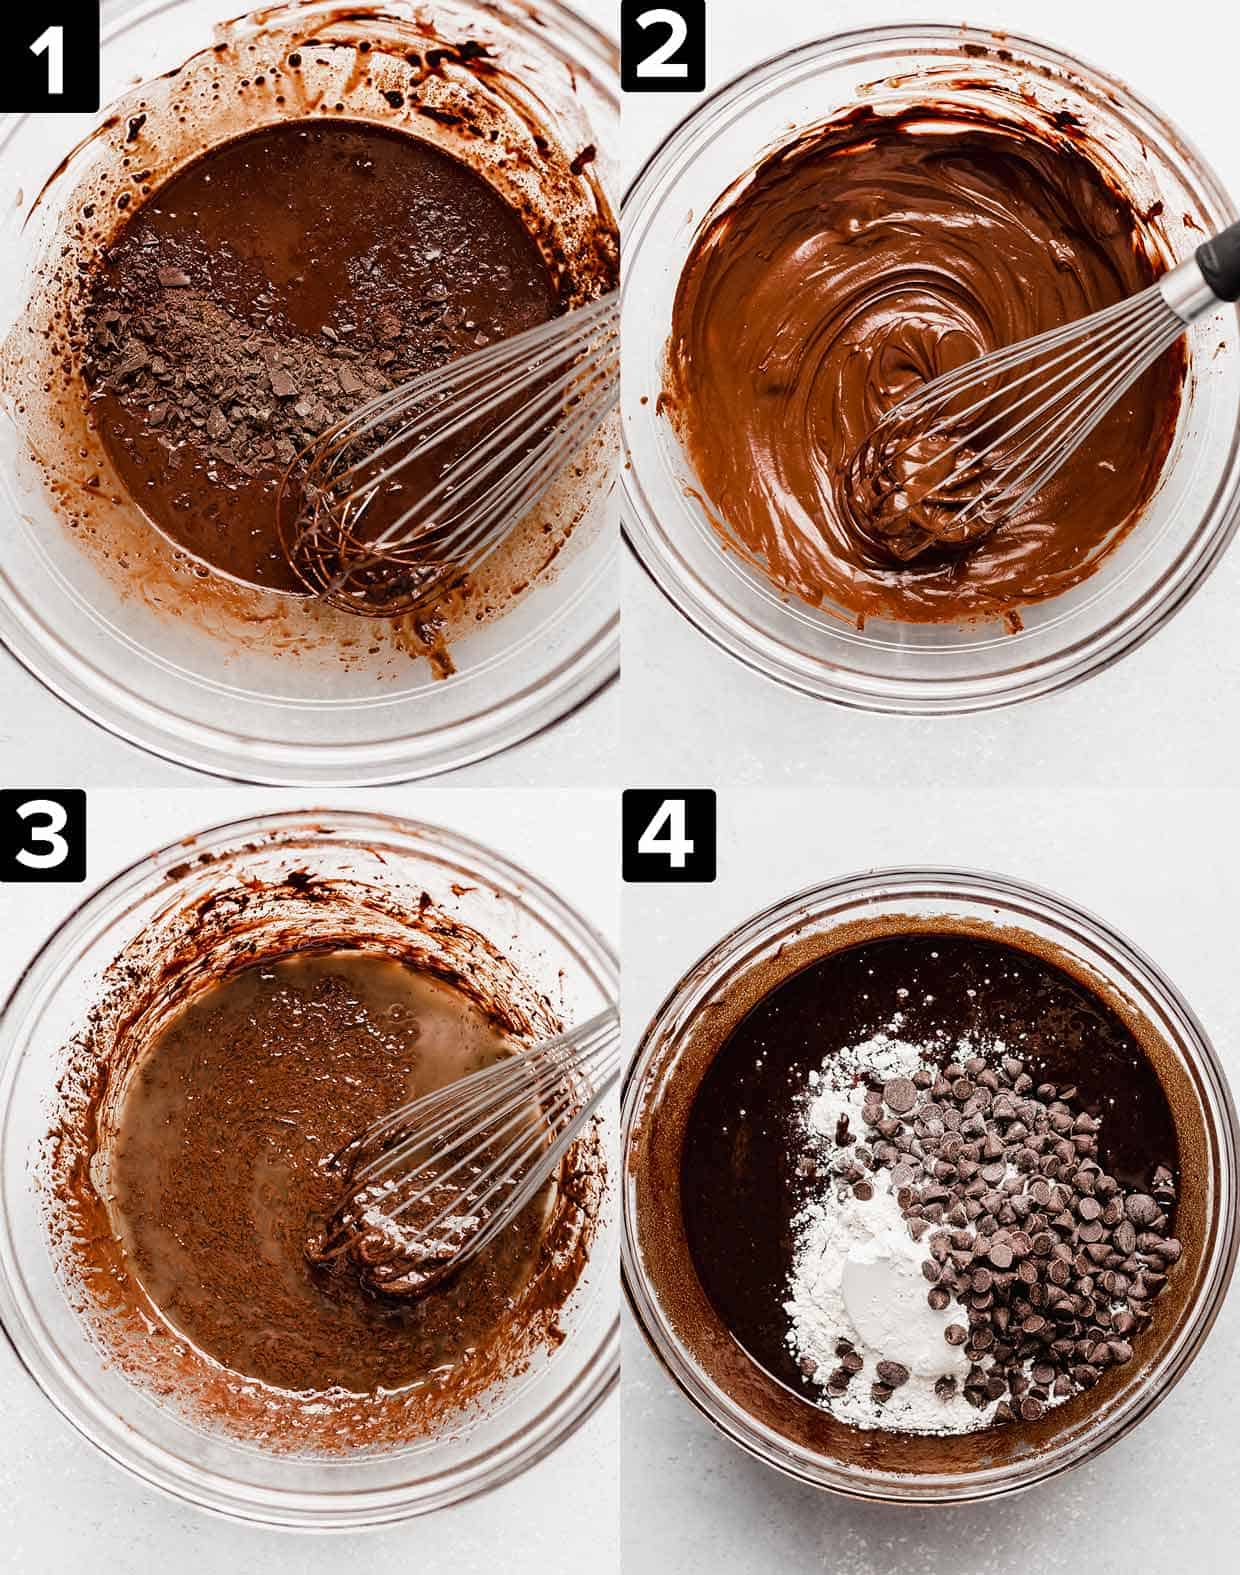 Four images showing how to make homemade brownies: a glass bowl on a white background mixing melted chocolate, with the wet and dry ingredient mix-ins.